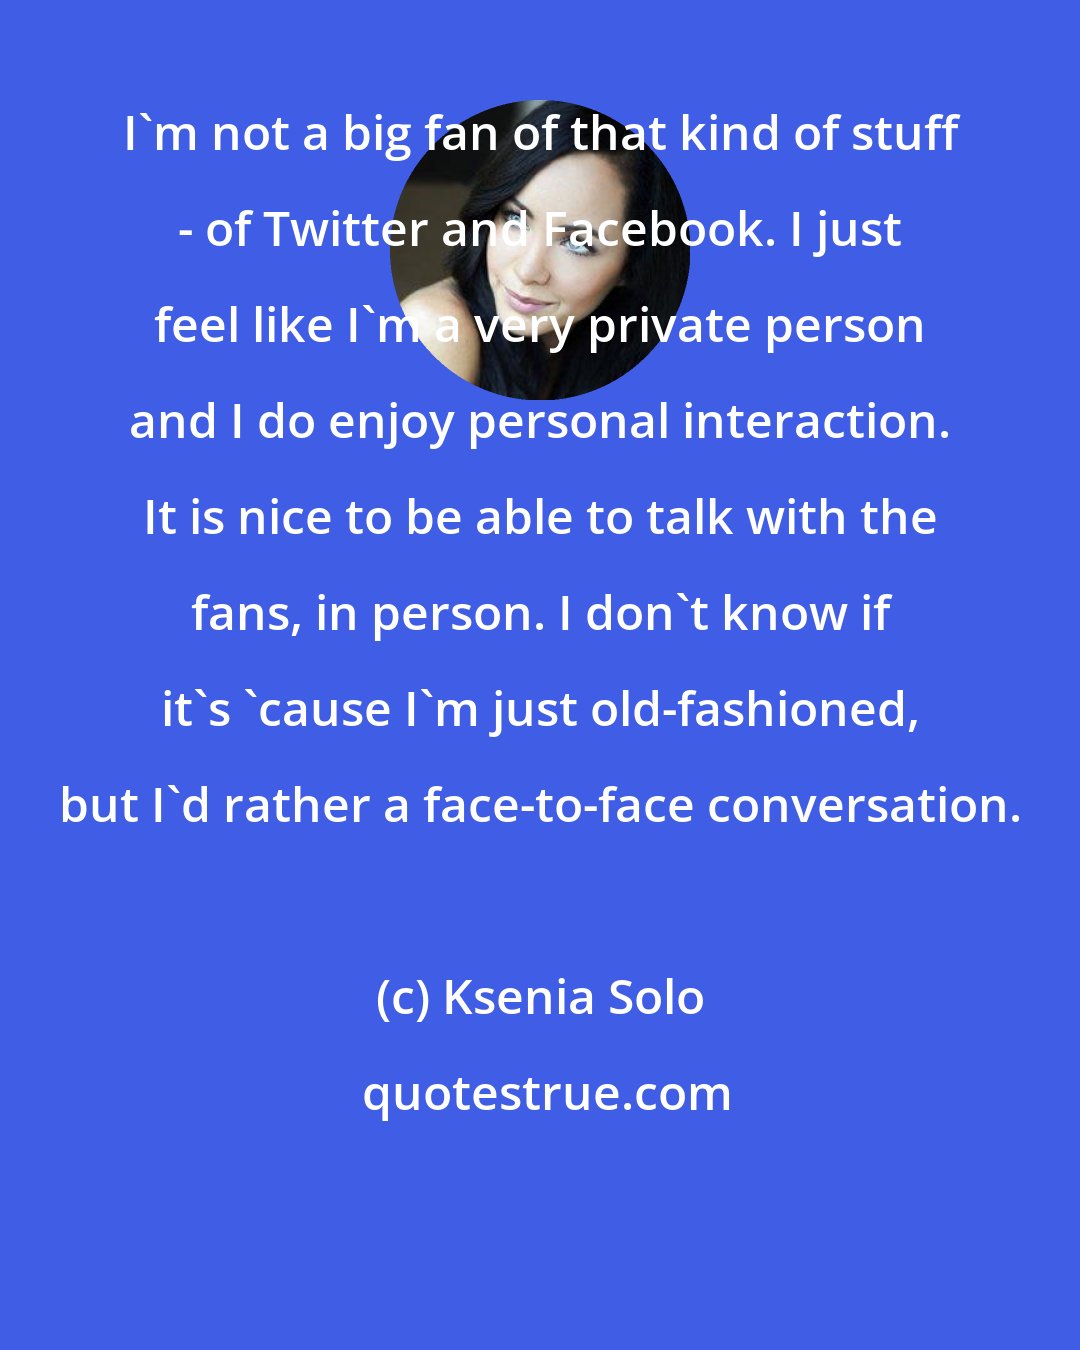 Ksenia Solo: I'm not a big fan of that kind of stuff - of Twitter and Facebook. I just feel like I'm a very private person and I do enjoy personal interaction. It is nice to be able to talk with the fans, in person. I don't know if it's 'cause I'm just old-fashioned, but I'd rather a face-to-face conversation.